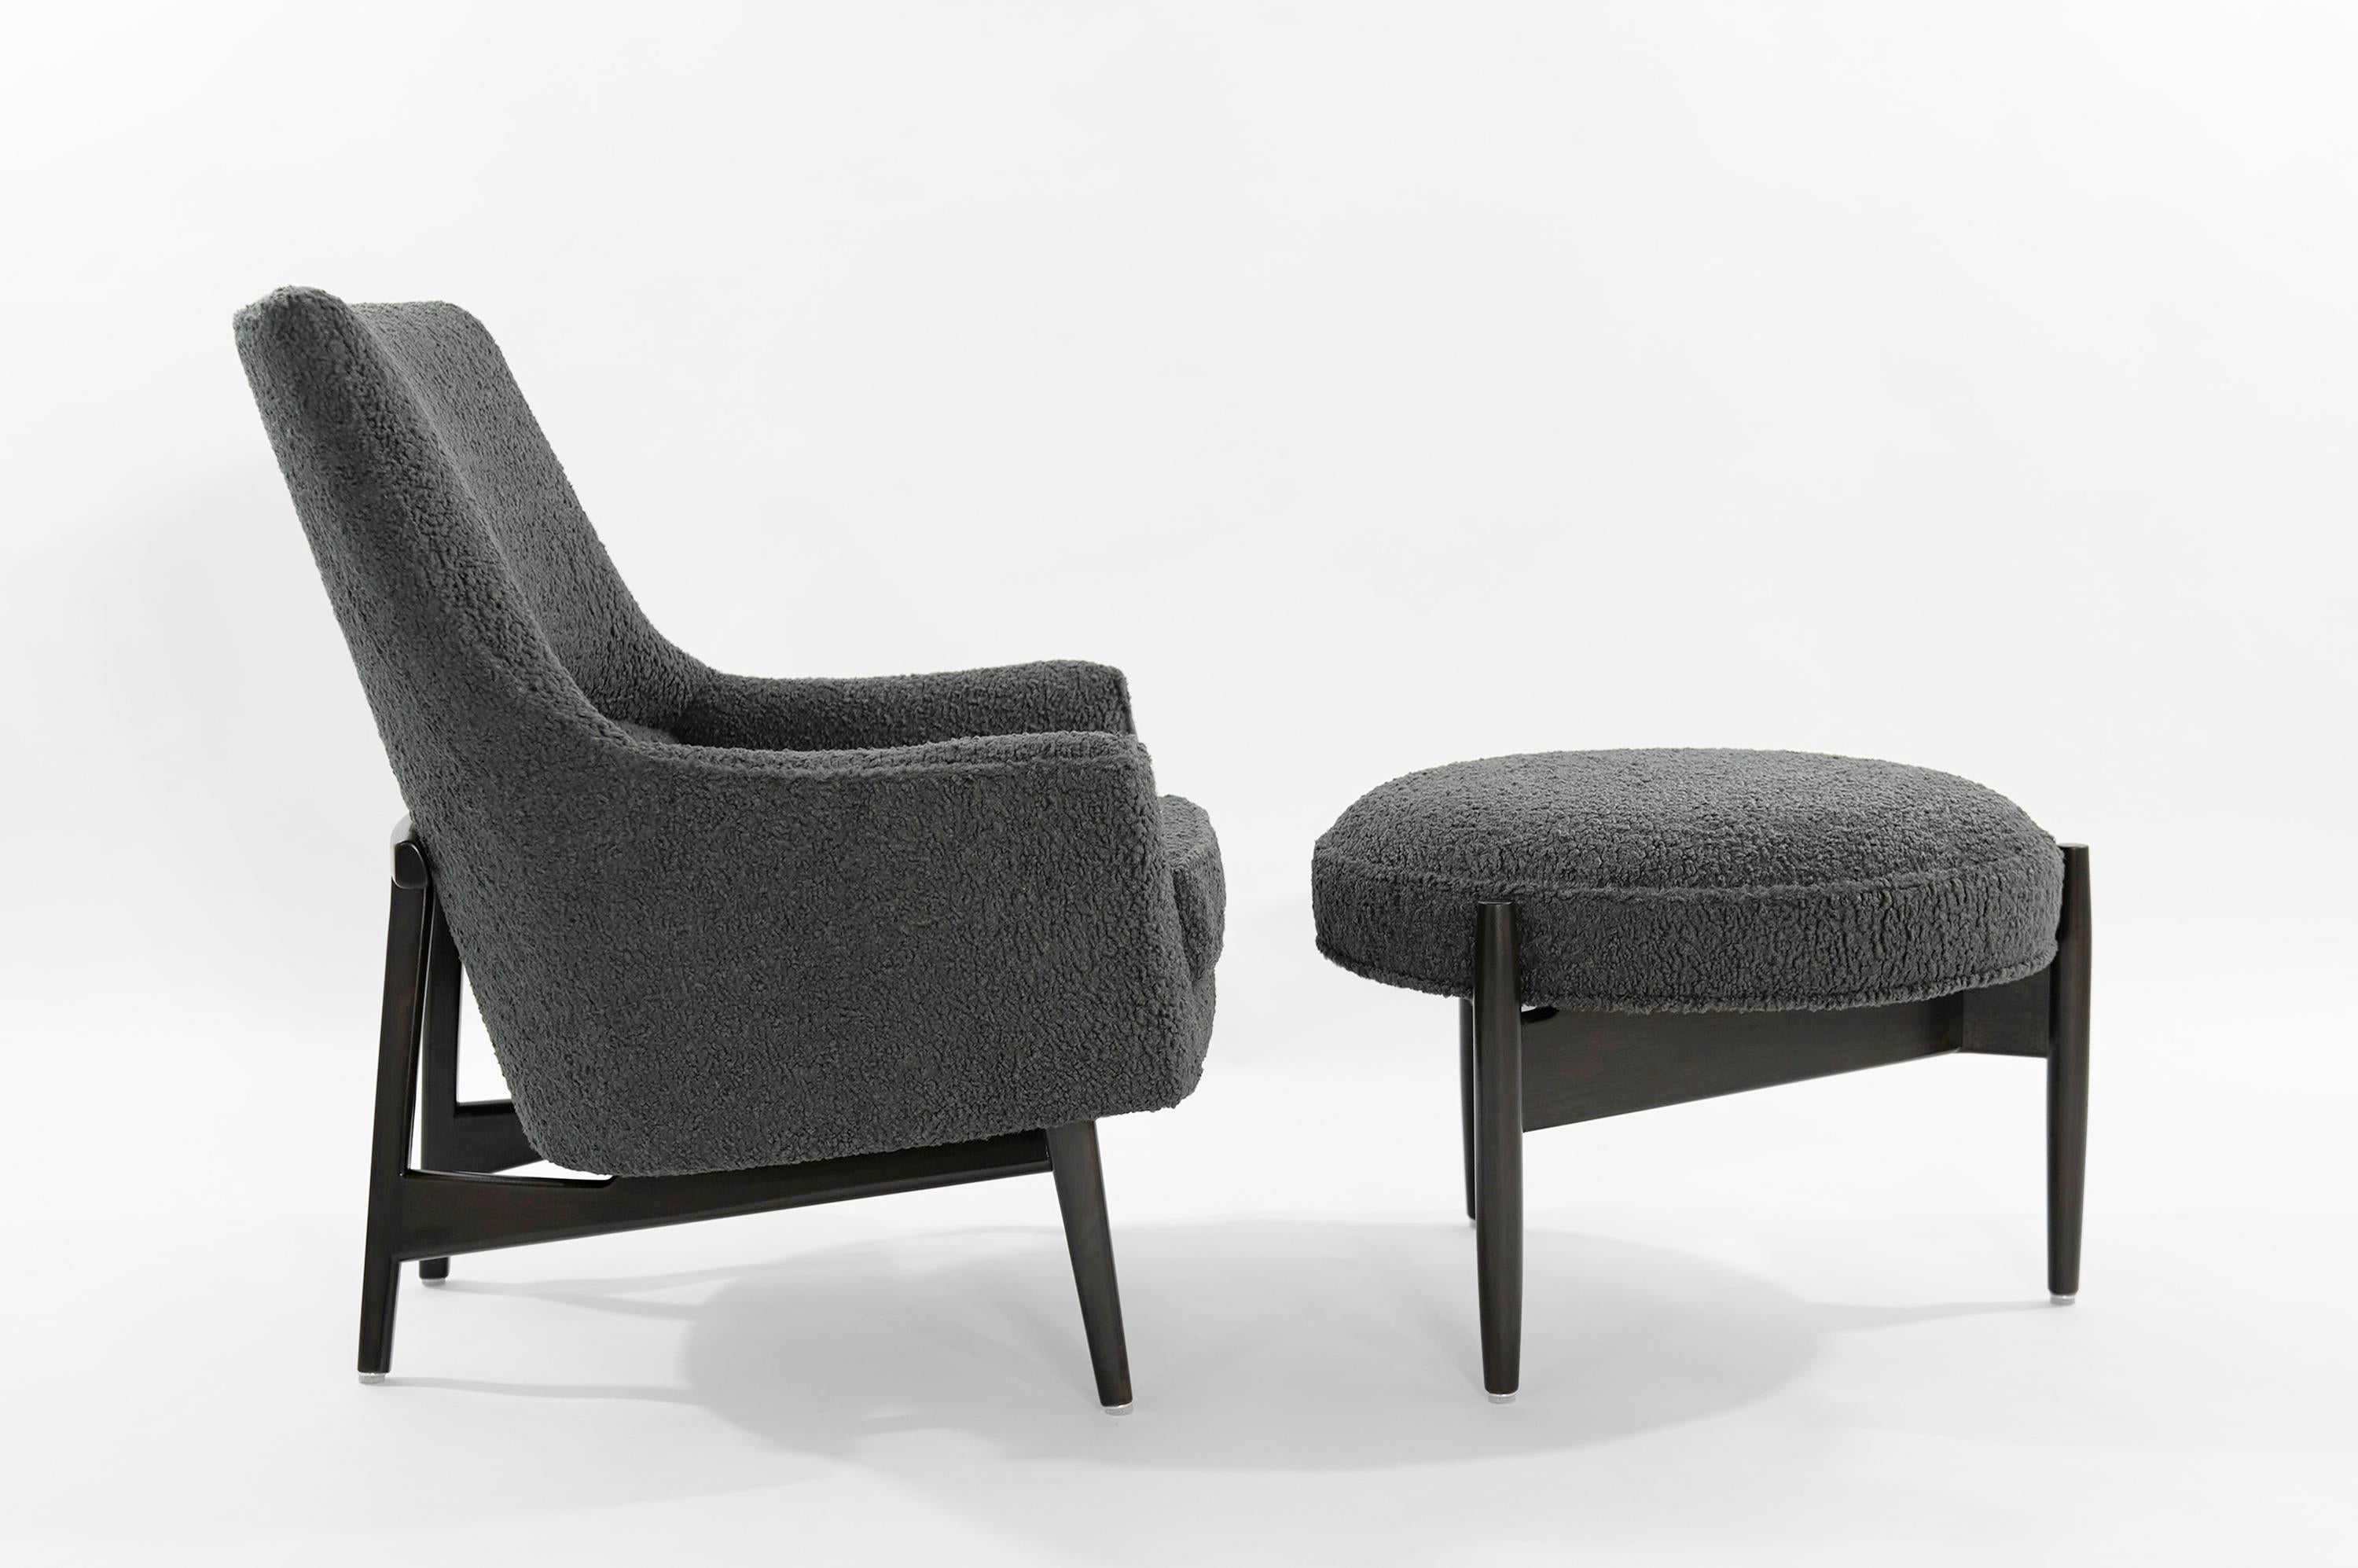 American Jens Risom A-Line Lounge Chair and Ottoman in Bouclé, circa 1950s